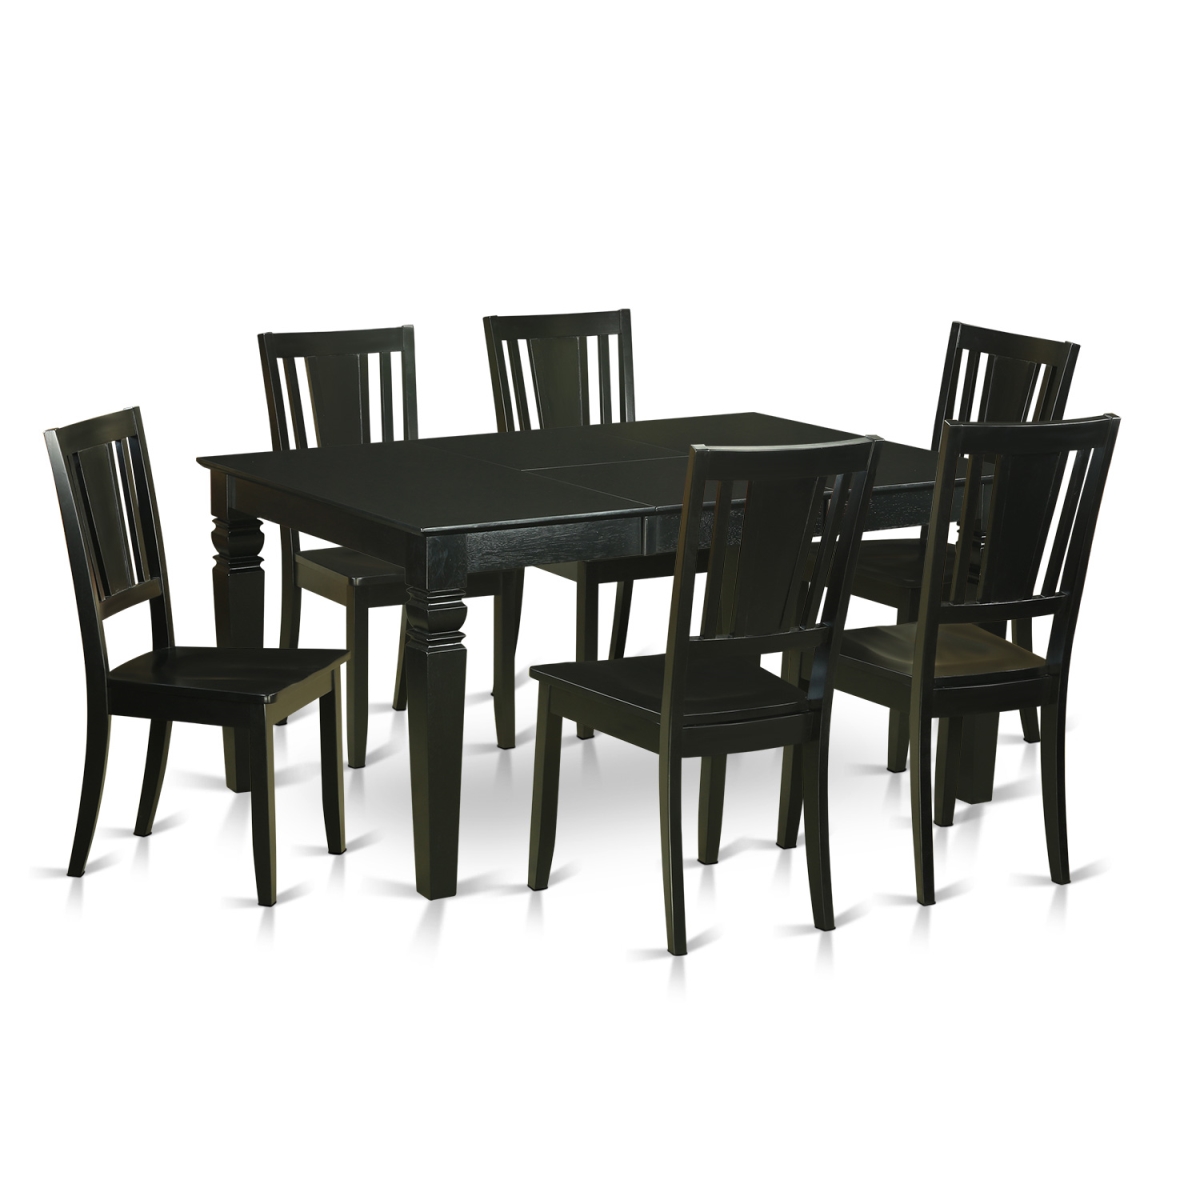 WEDU7-BLK-W Dining Room Set with 6 Table & 6 Chairs, Black - 7 Piece -  East West Furniture